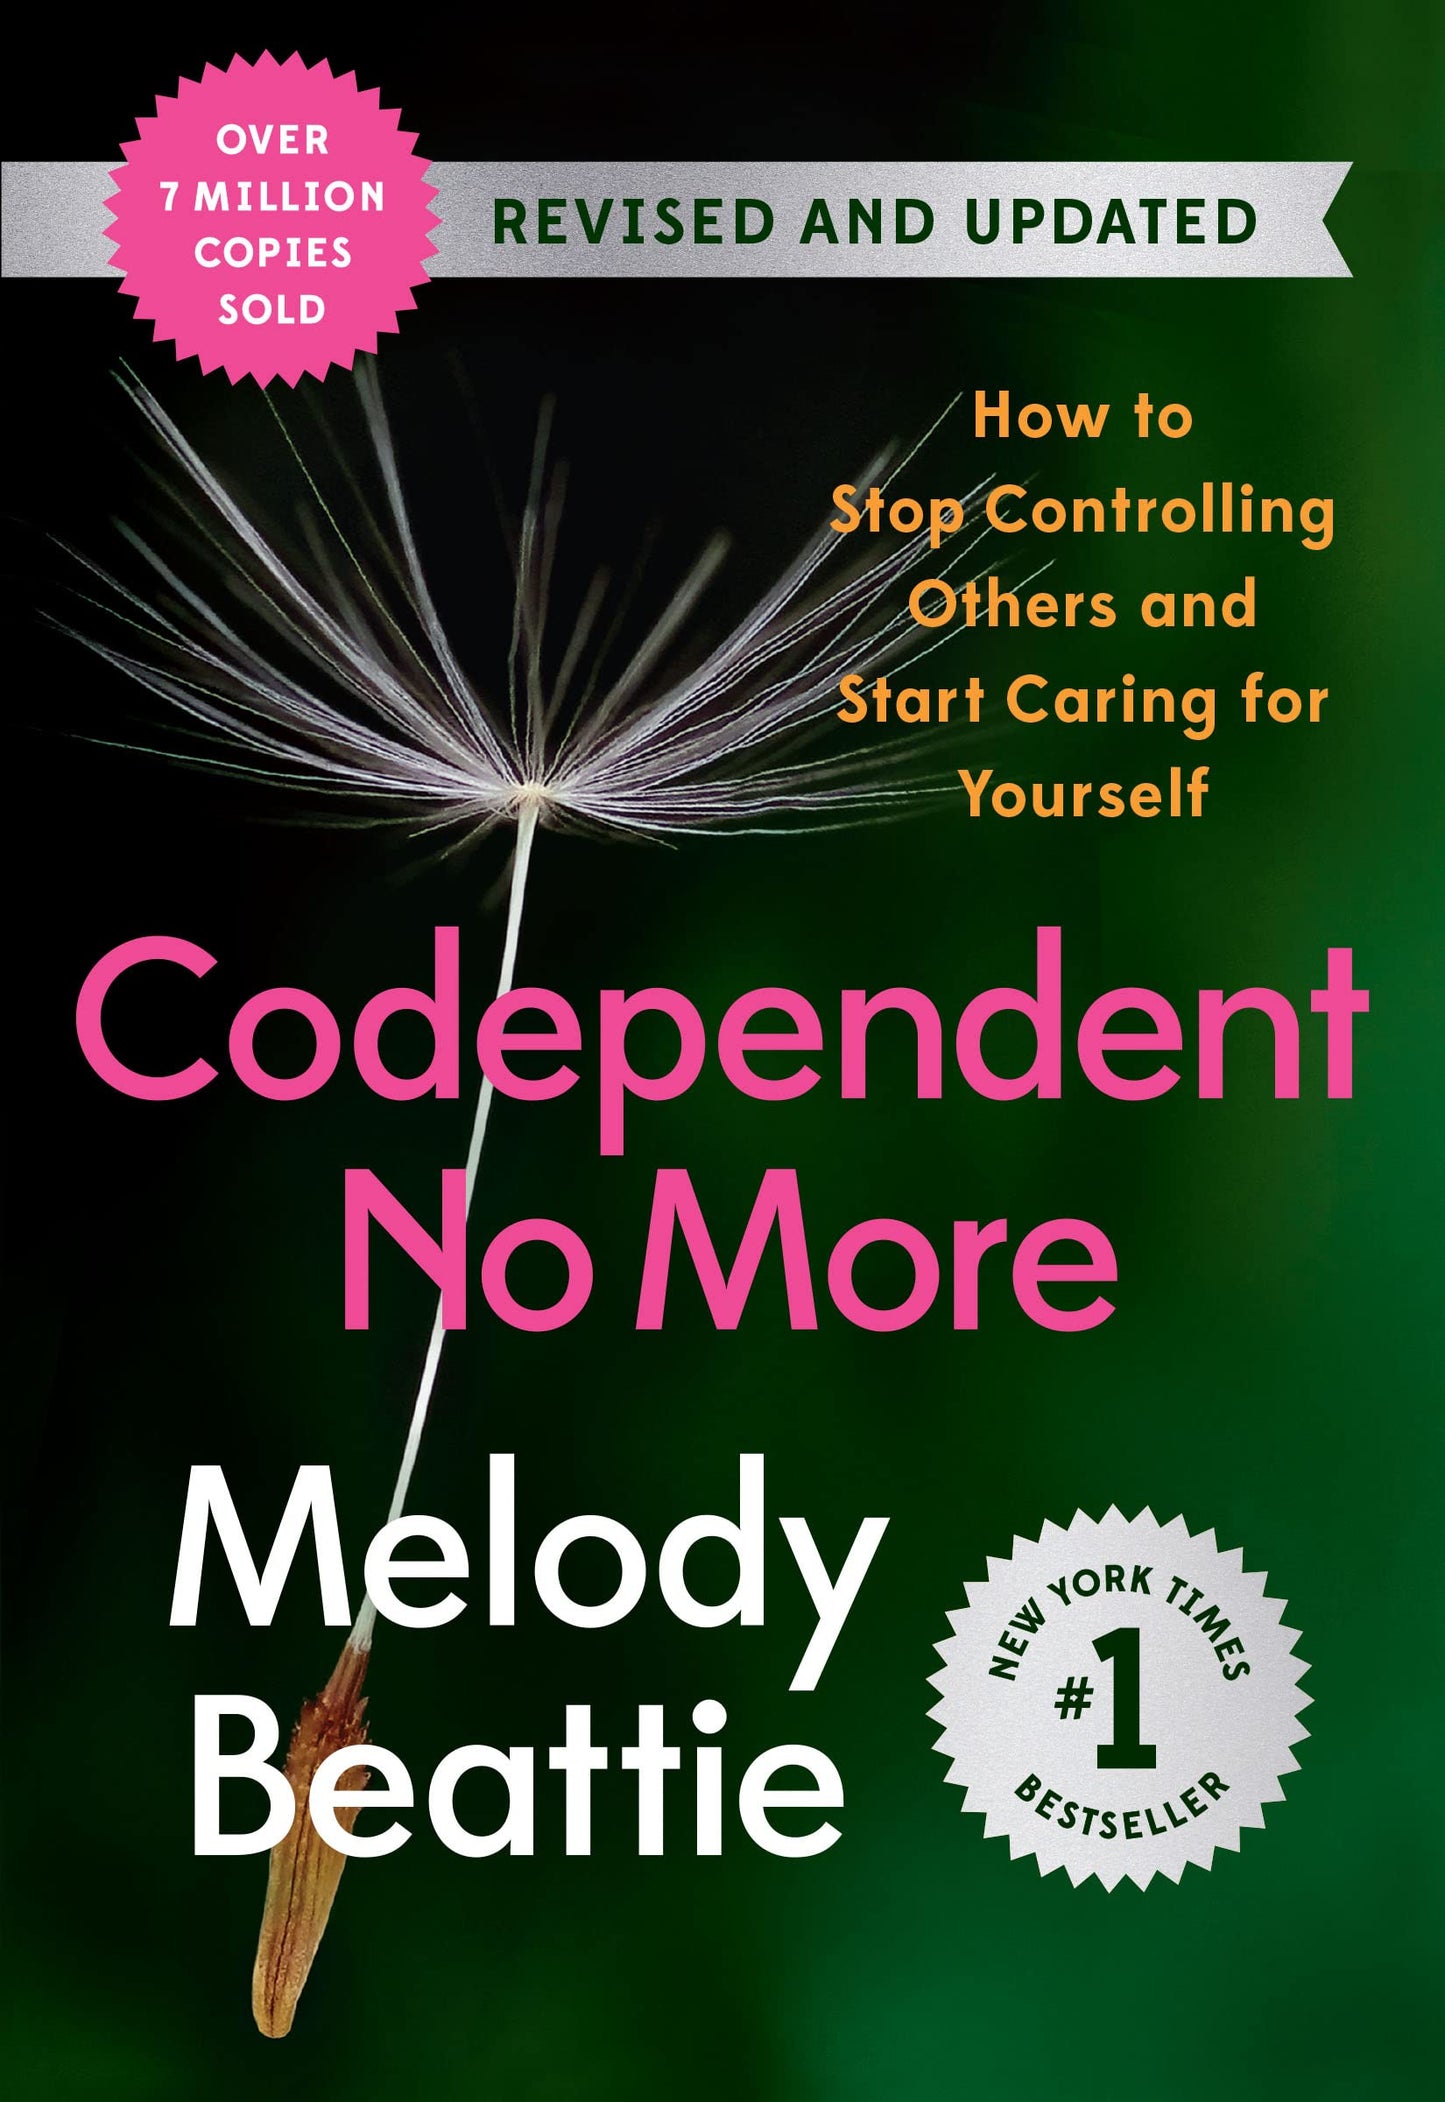 Codependent No More // How to Stop Controlling Others and Start Caring for Yourself